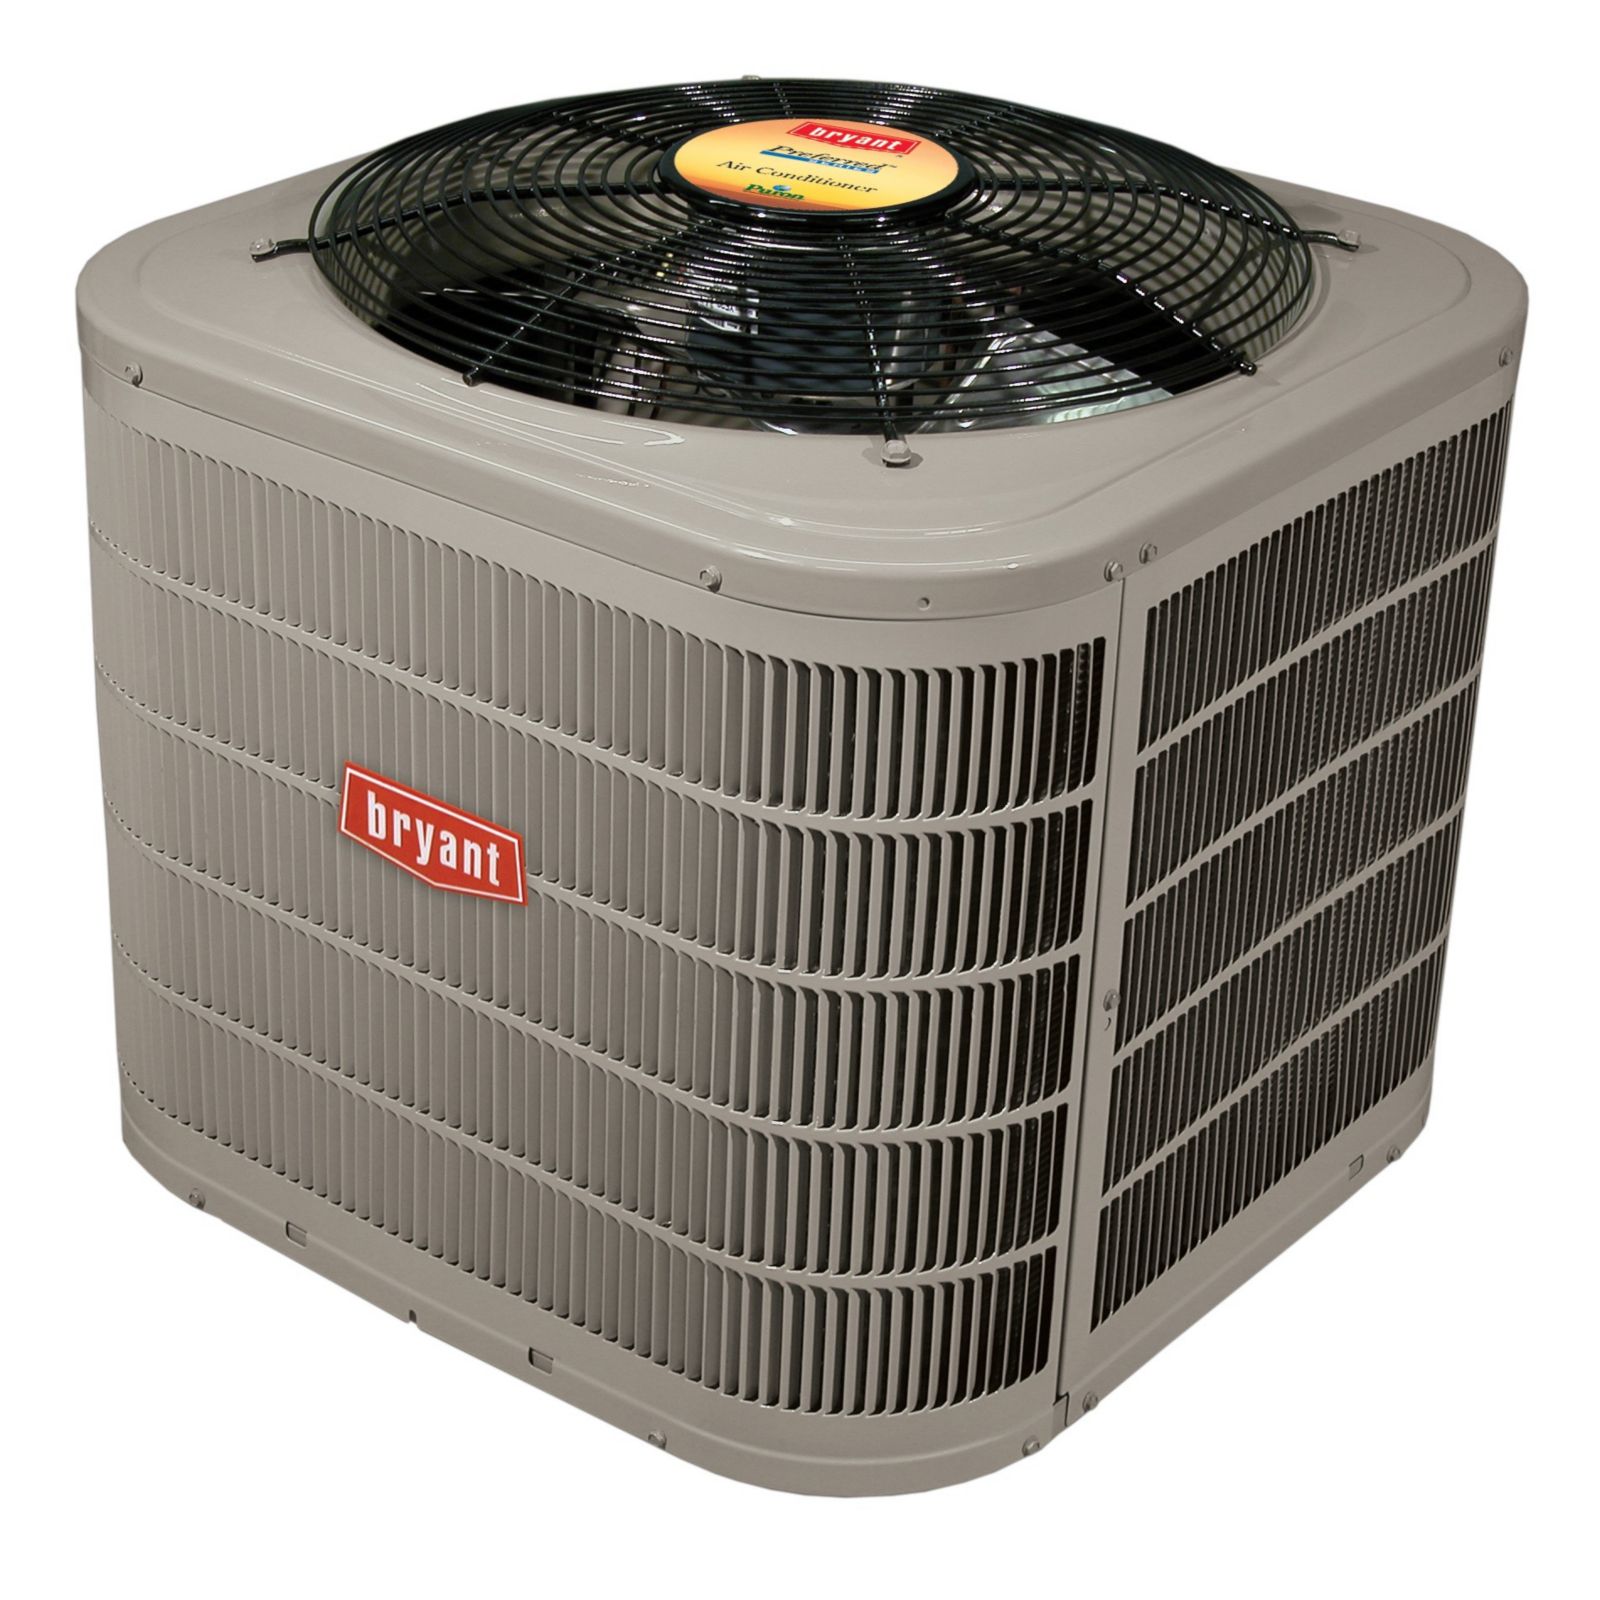 Carrier 20 Seer Air Conditioner / Carrier Air Conditioner Prices And